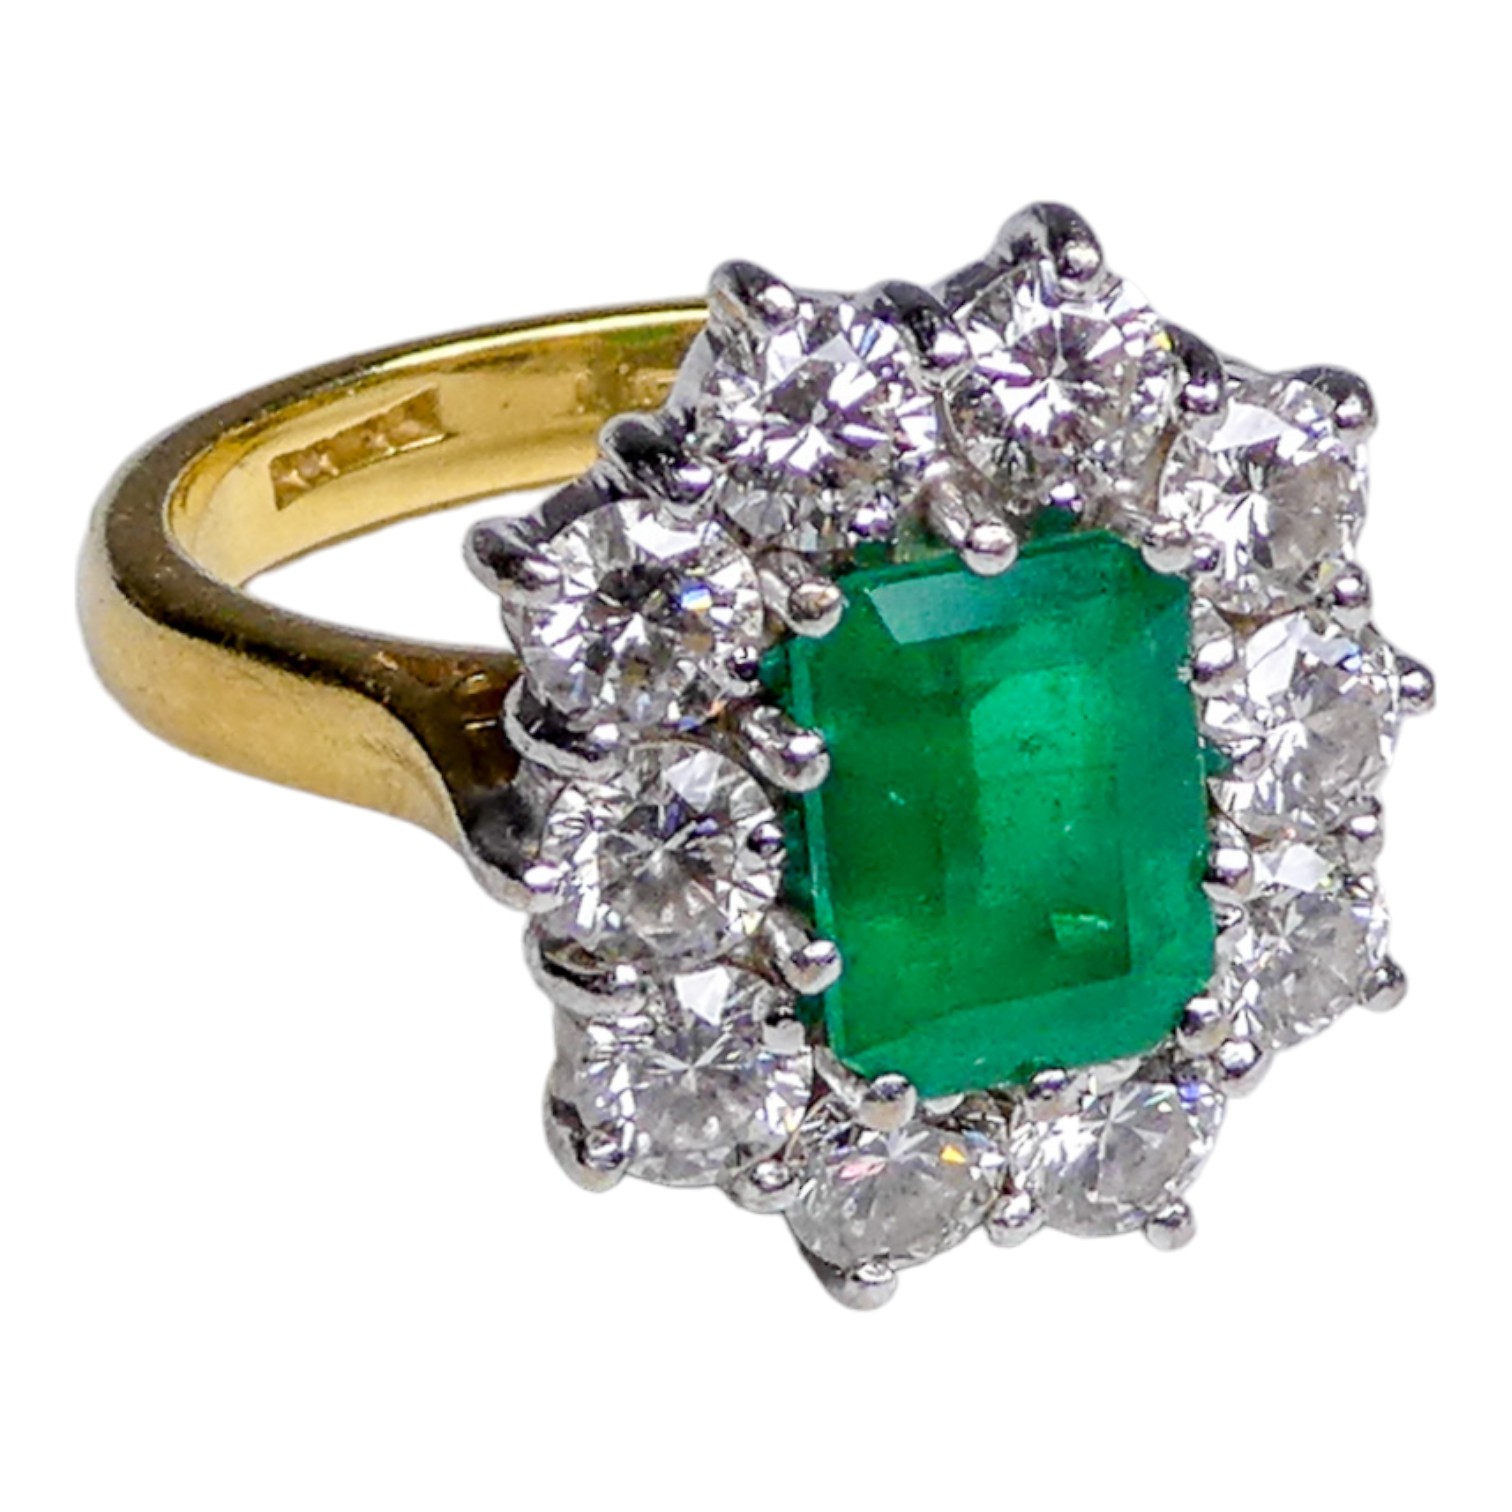 An 18ct yellow gold emerald and diamond cluster ring - size M/N, weight 8.5g.